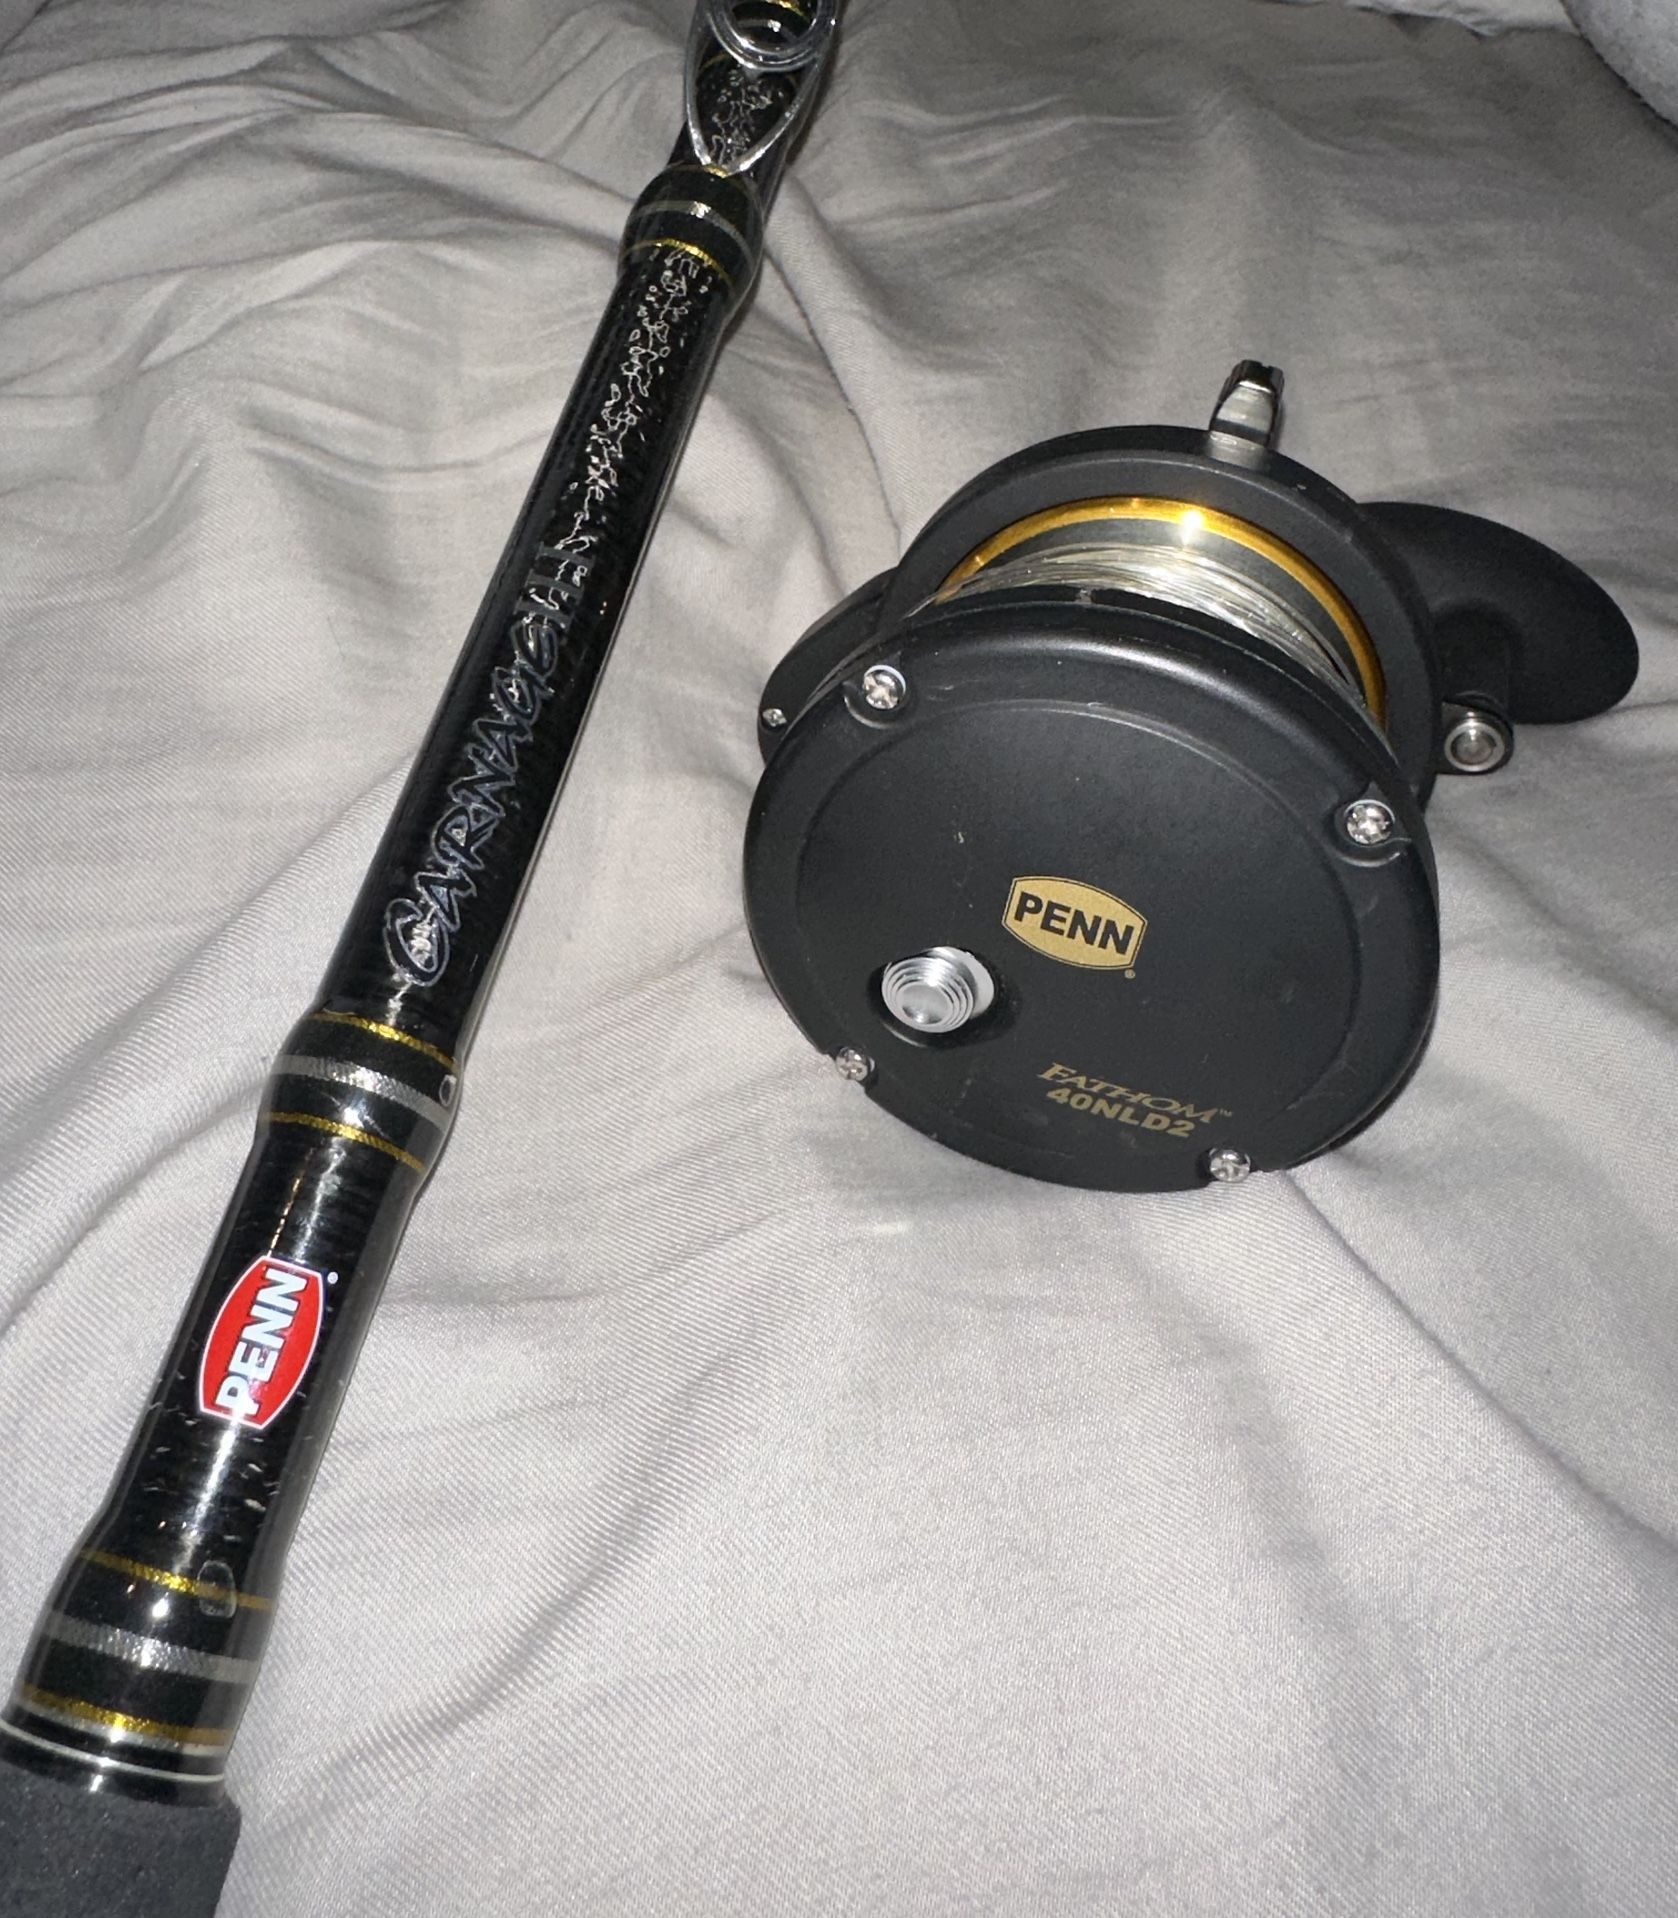 Fishing Pole And reel